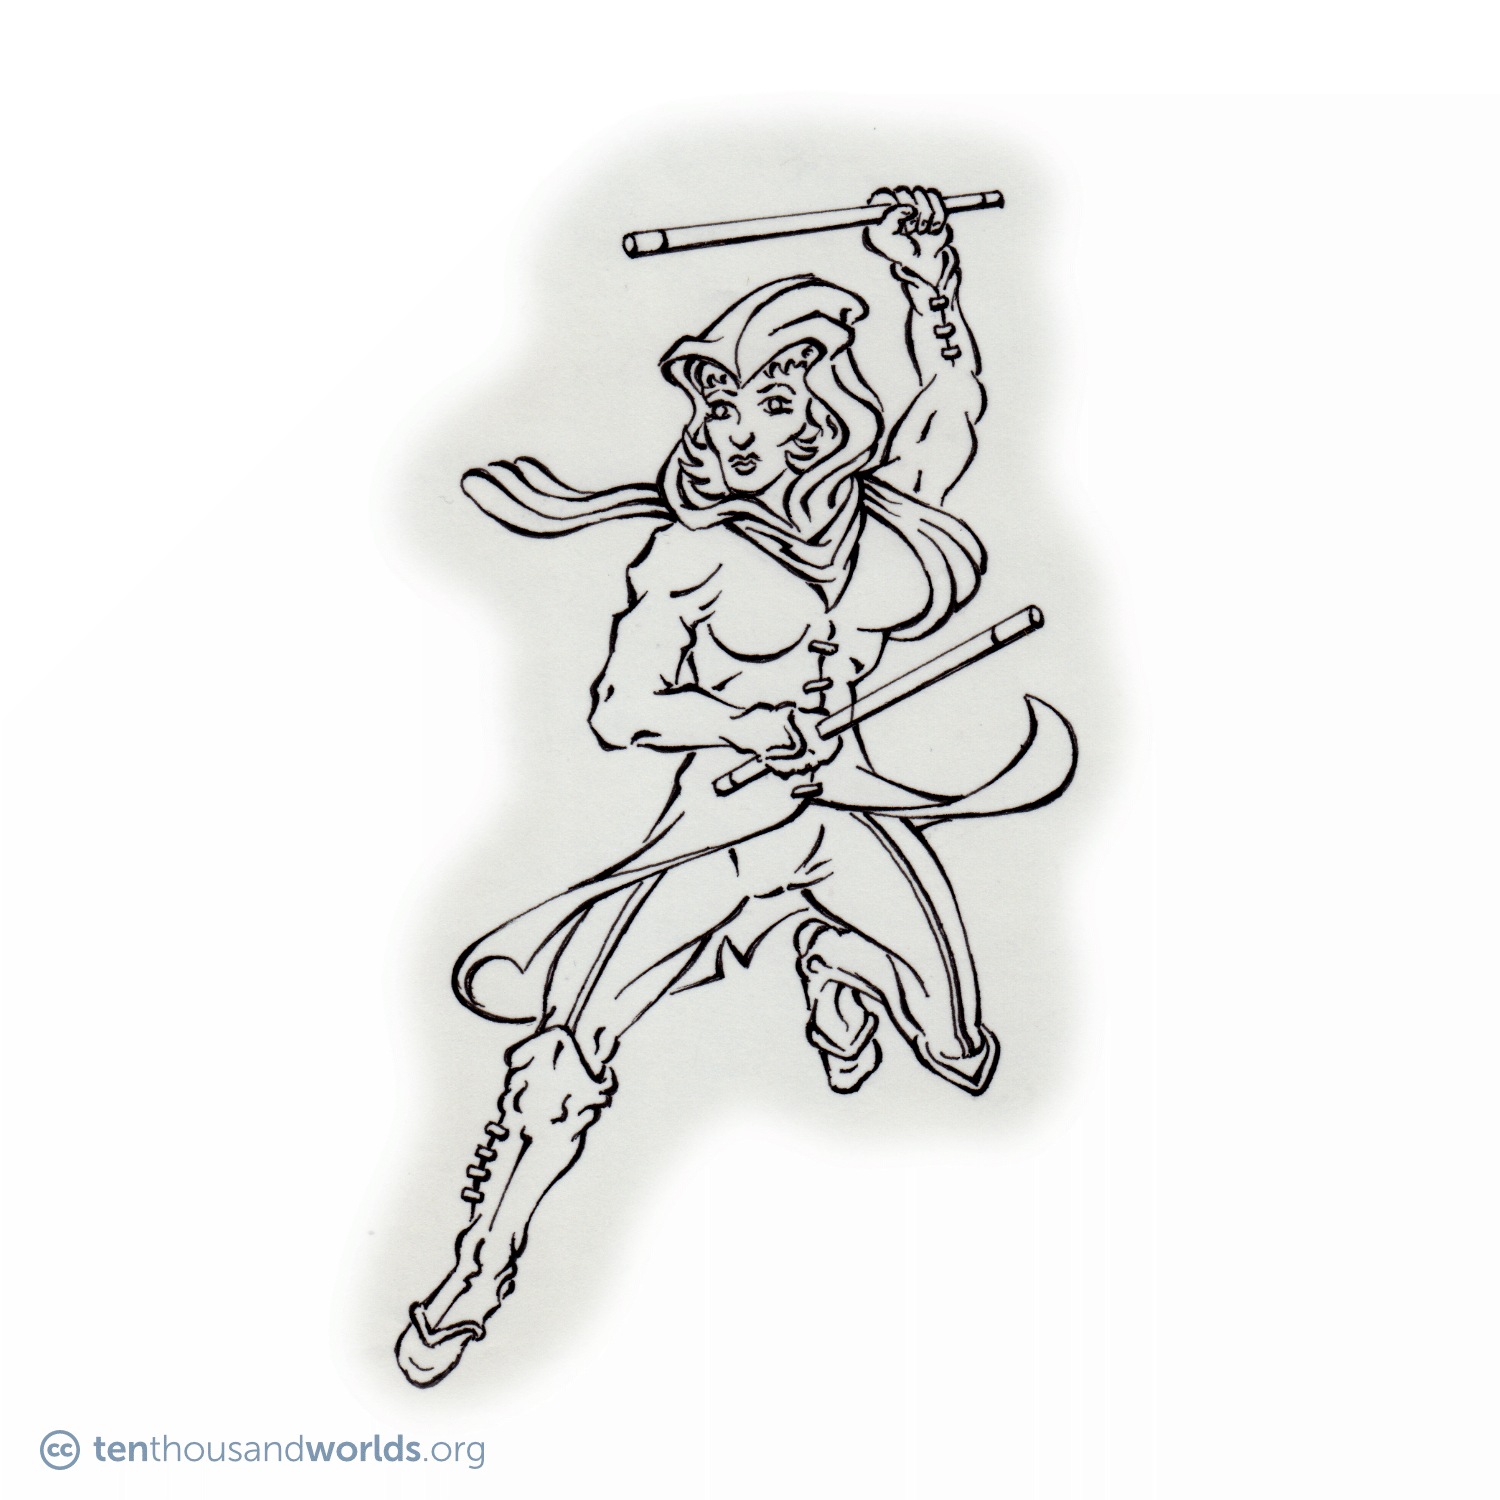 An ink outline of a woman wearing a hooded coat, trousers, gaiters, and a scarf, whirling in combat wielding a pair of battle staves.